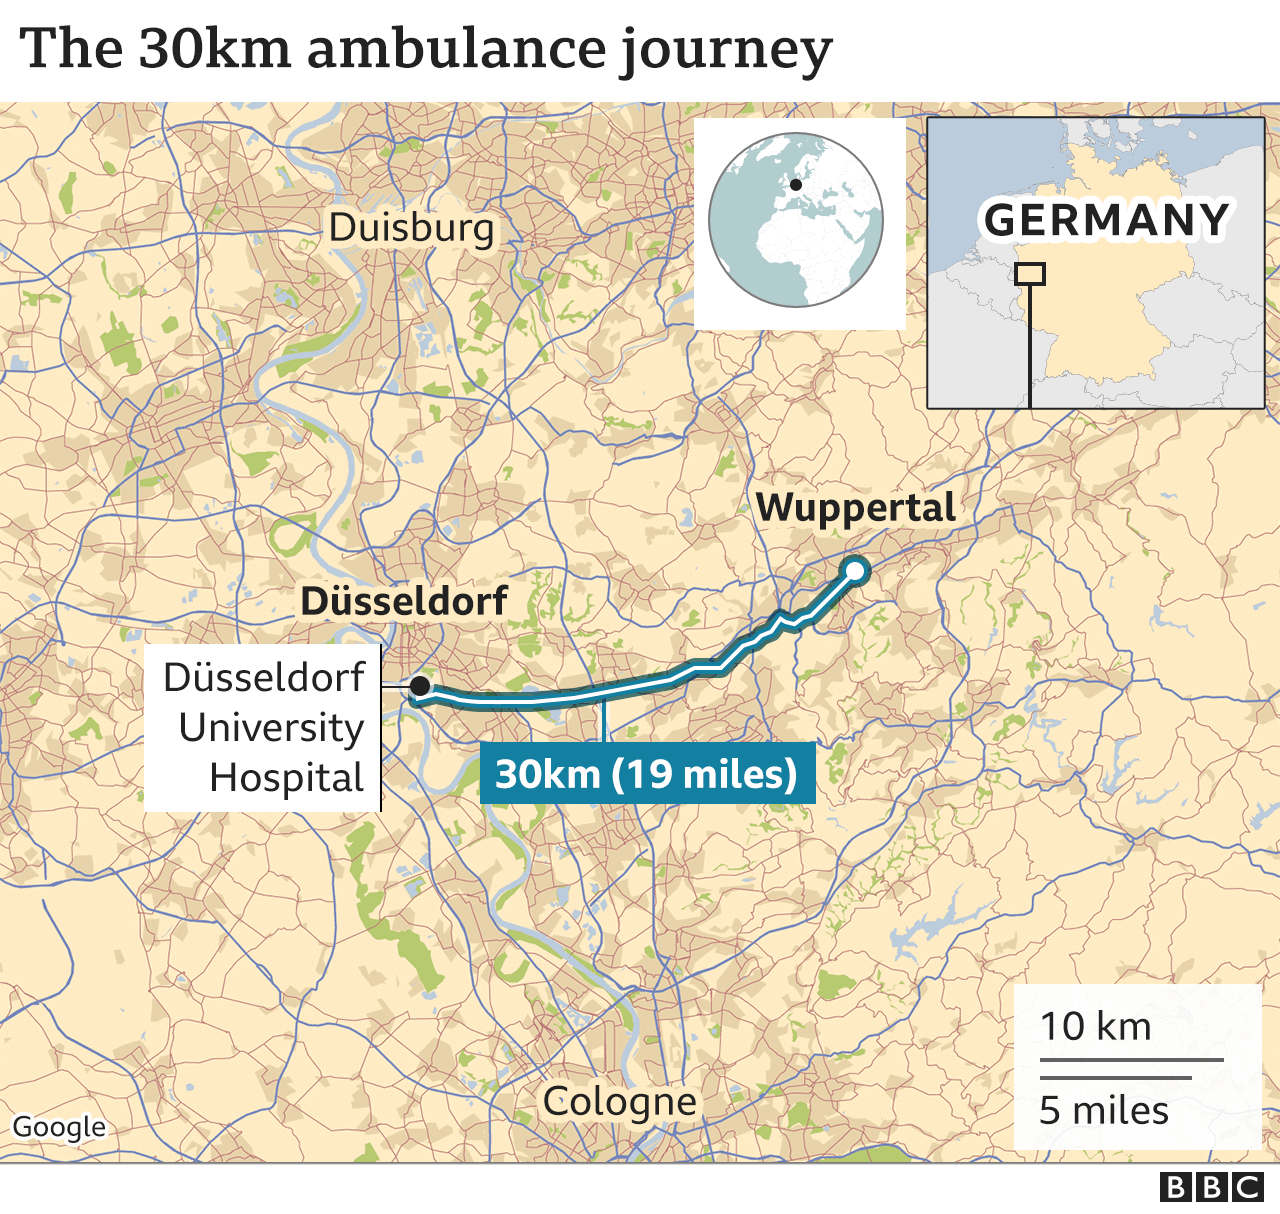 A map shows the distance from Dusseldorf to Wuppertal in Germany